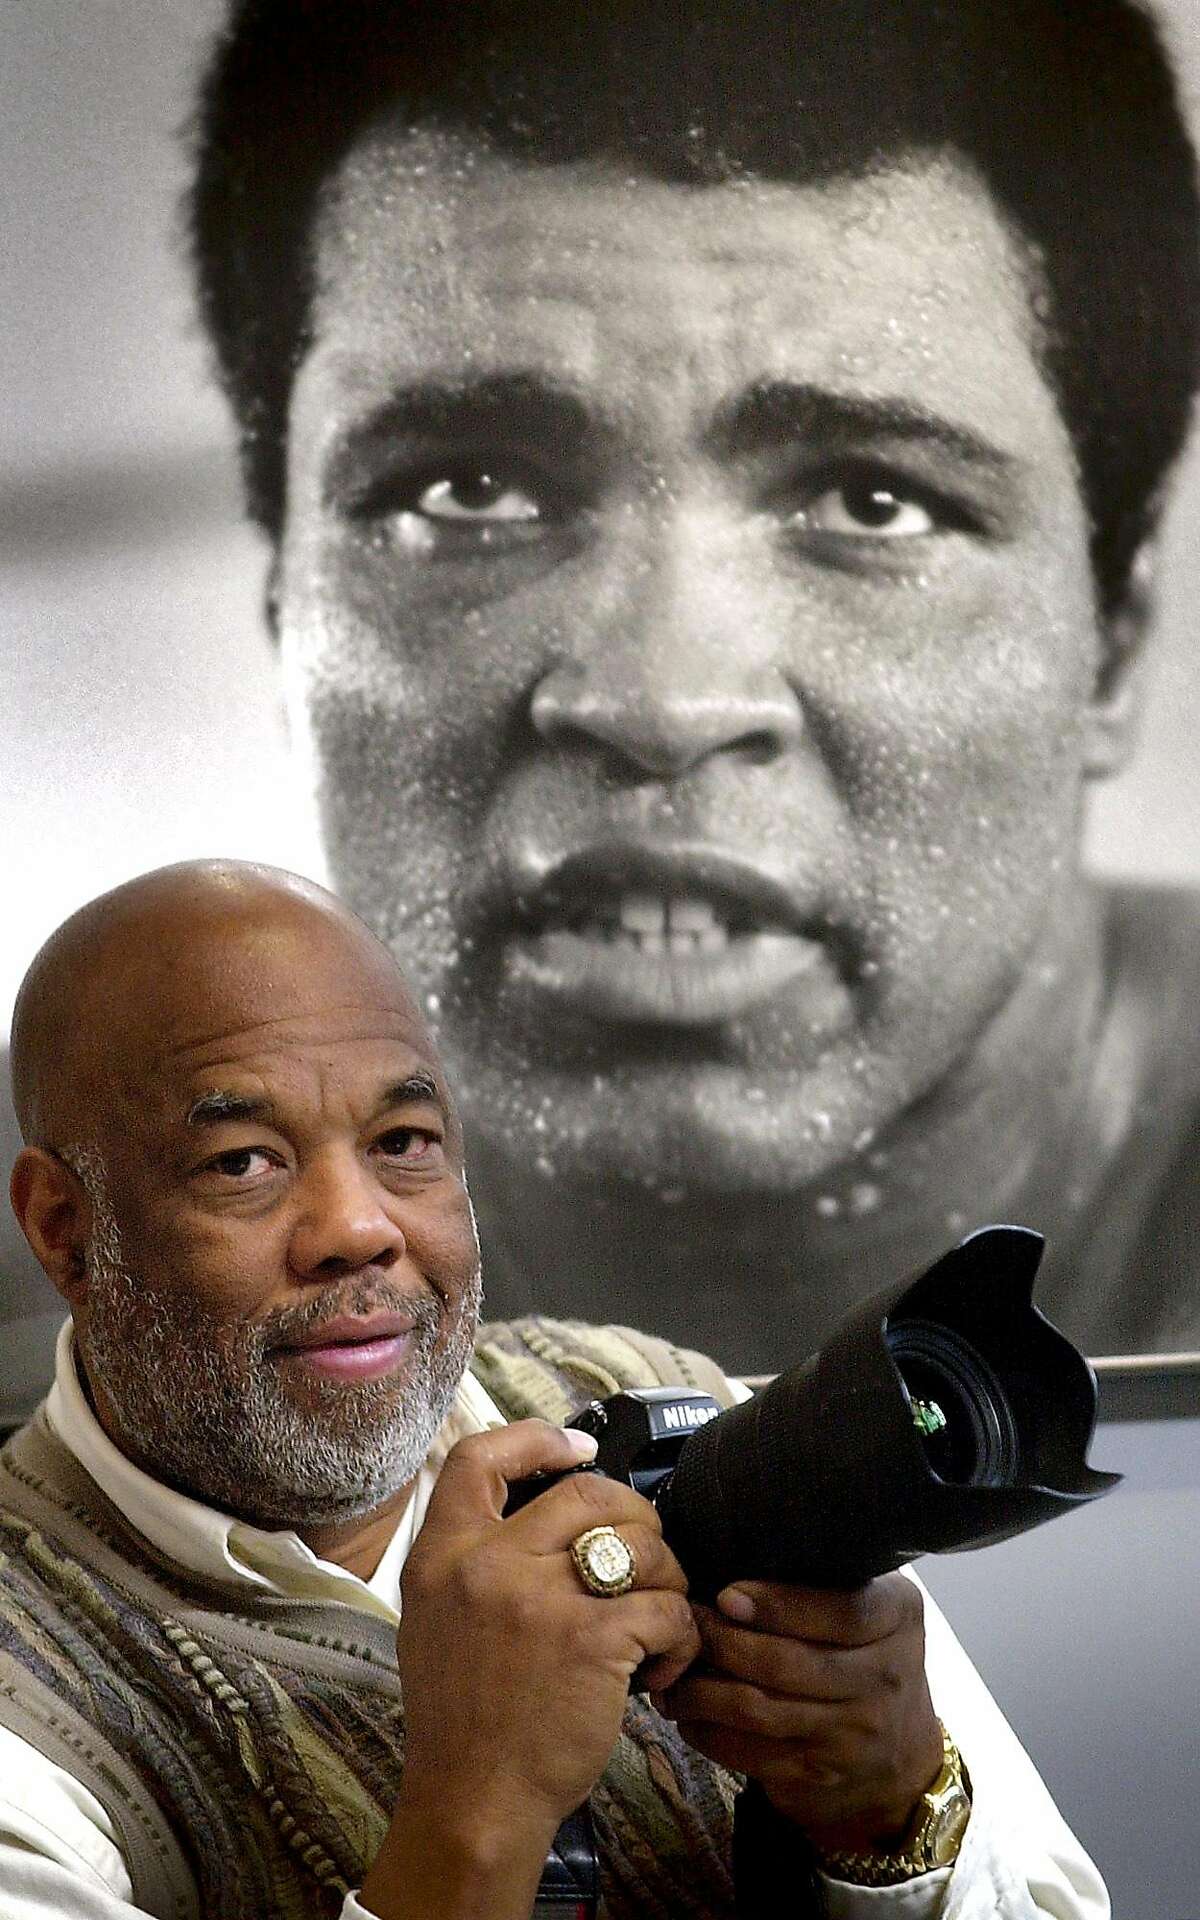 Photographer Howard Bingham stands next to a photo of Muhammad Ali, part of an exhibit of his works Friday, Jan. 18, 2002 at the Smithsonian's Arts and Industries Building in Washington. The exhibit of 123 photos that Bingham shot in Zaire in September and October 1974 around the time of Ali's storied fight with George Foreman., opens Saturday. (AP Photo/Kenneth Lambert) HOUCHRON CAPTION (01/19/2002): Photographer Howard Bingham stands Friday next to a photo of Muhammad Ali, part of an exhibit of his work at the Smithsonian Institution in Washington.